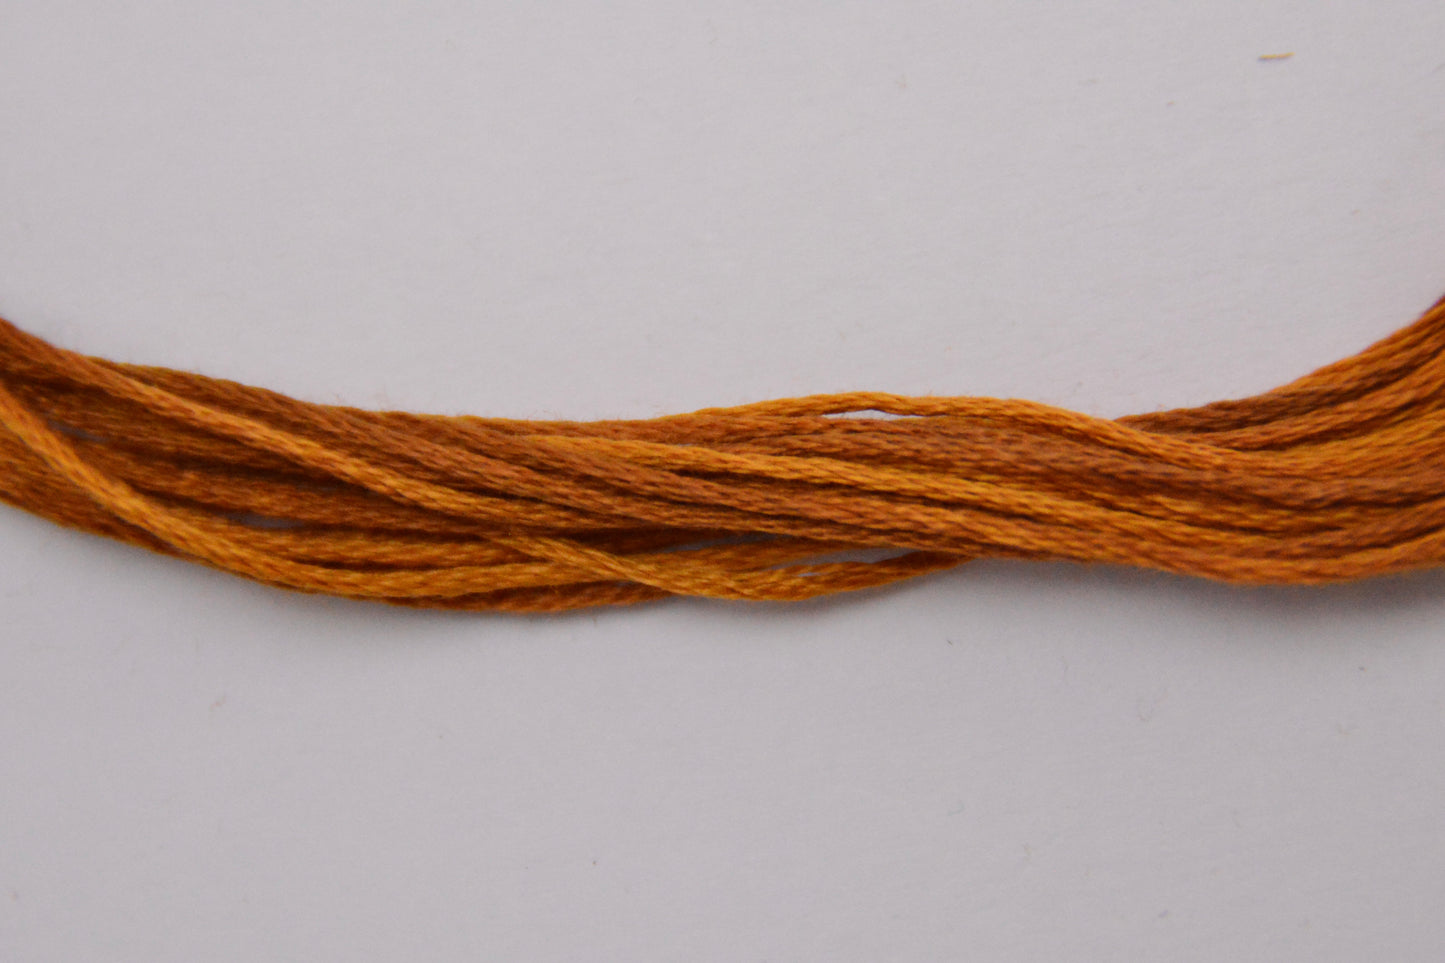 Tiger’s Eye 1225 Weeks Dye Works 6-Strand Hand-Dyed Embroidery Floss